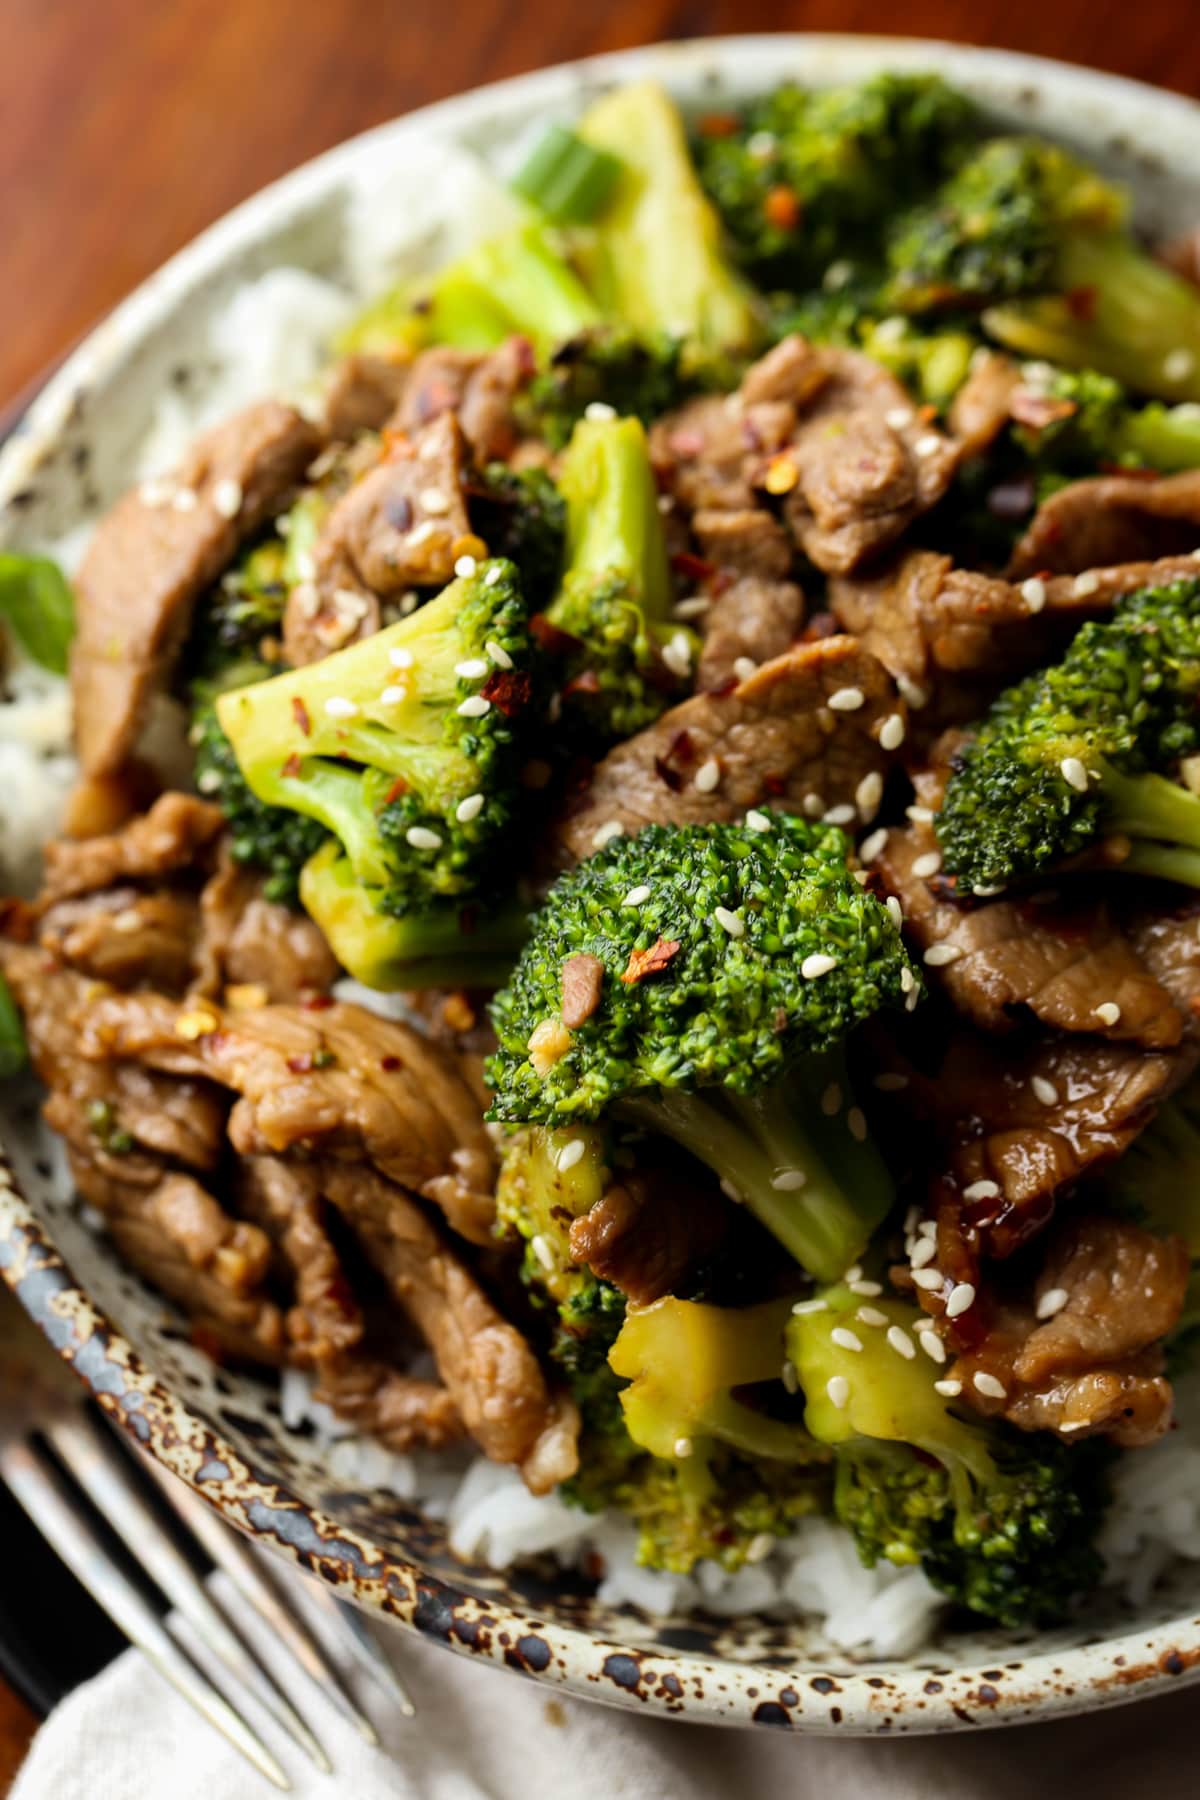 Steak slices and broccoli on a plate with white rice